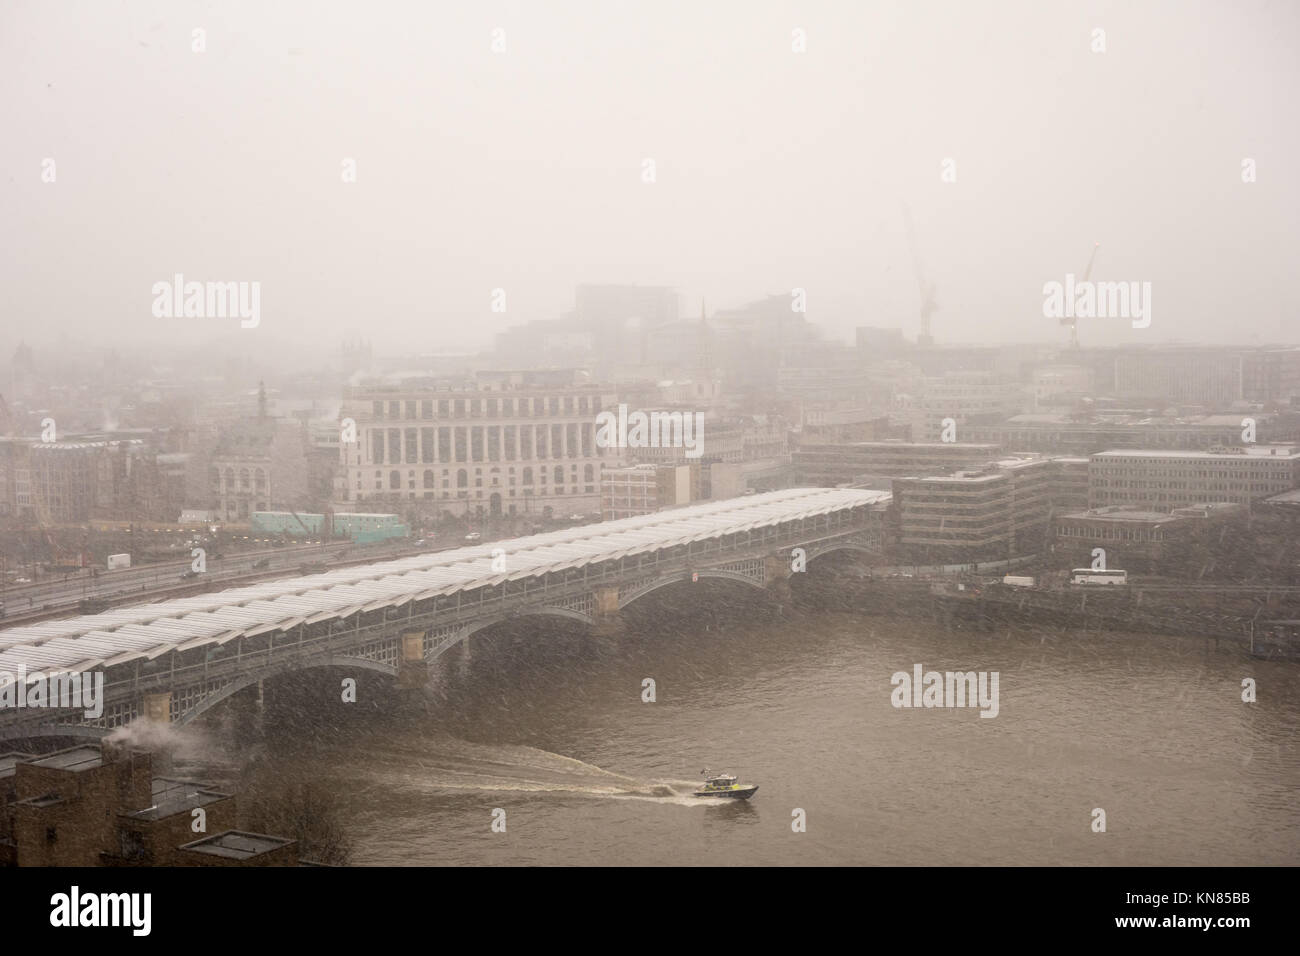 LONDON, UK. 10th Dec, 2017. Heavy snow fall across London today could cause travel chaos at Blackfriars Station on Monday morning. Credit: Fawcitt/Alamy Live News. Stock Photo